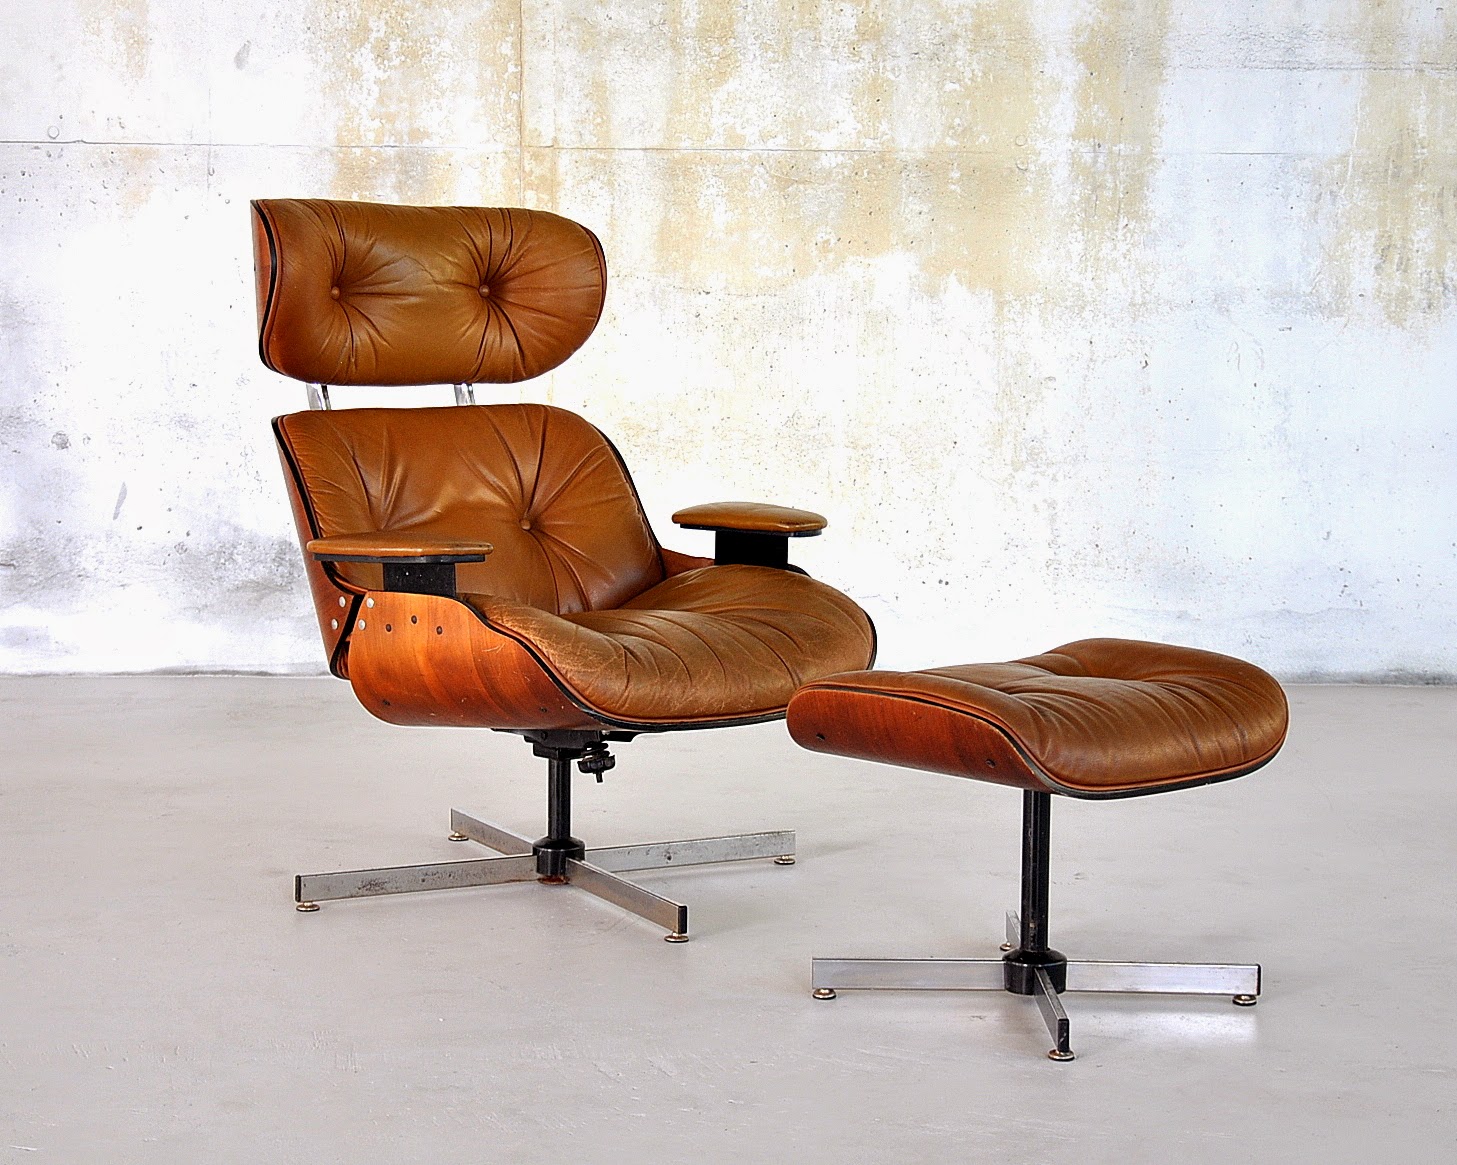 SELECT MODERN: Plycraft Eames Style Leather Lounge Chair & Ottoman